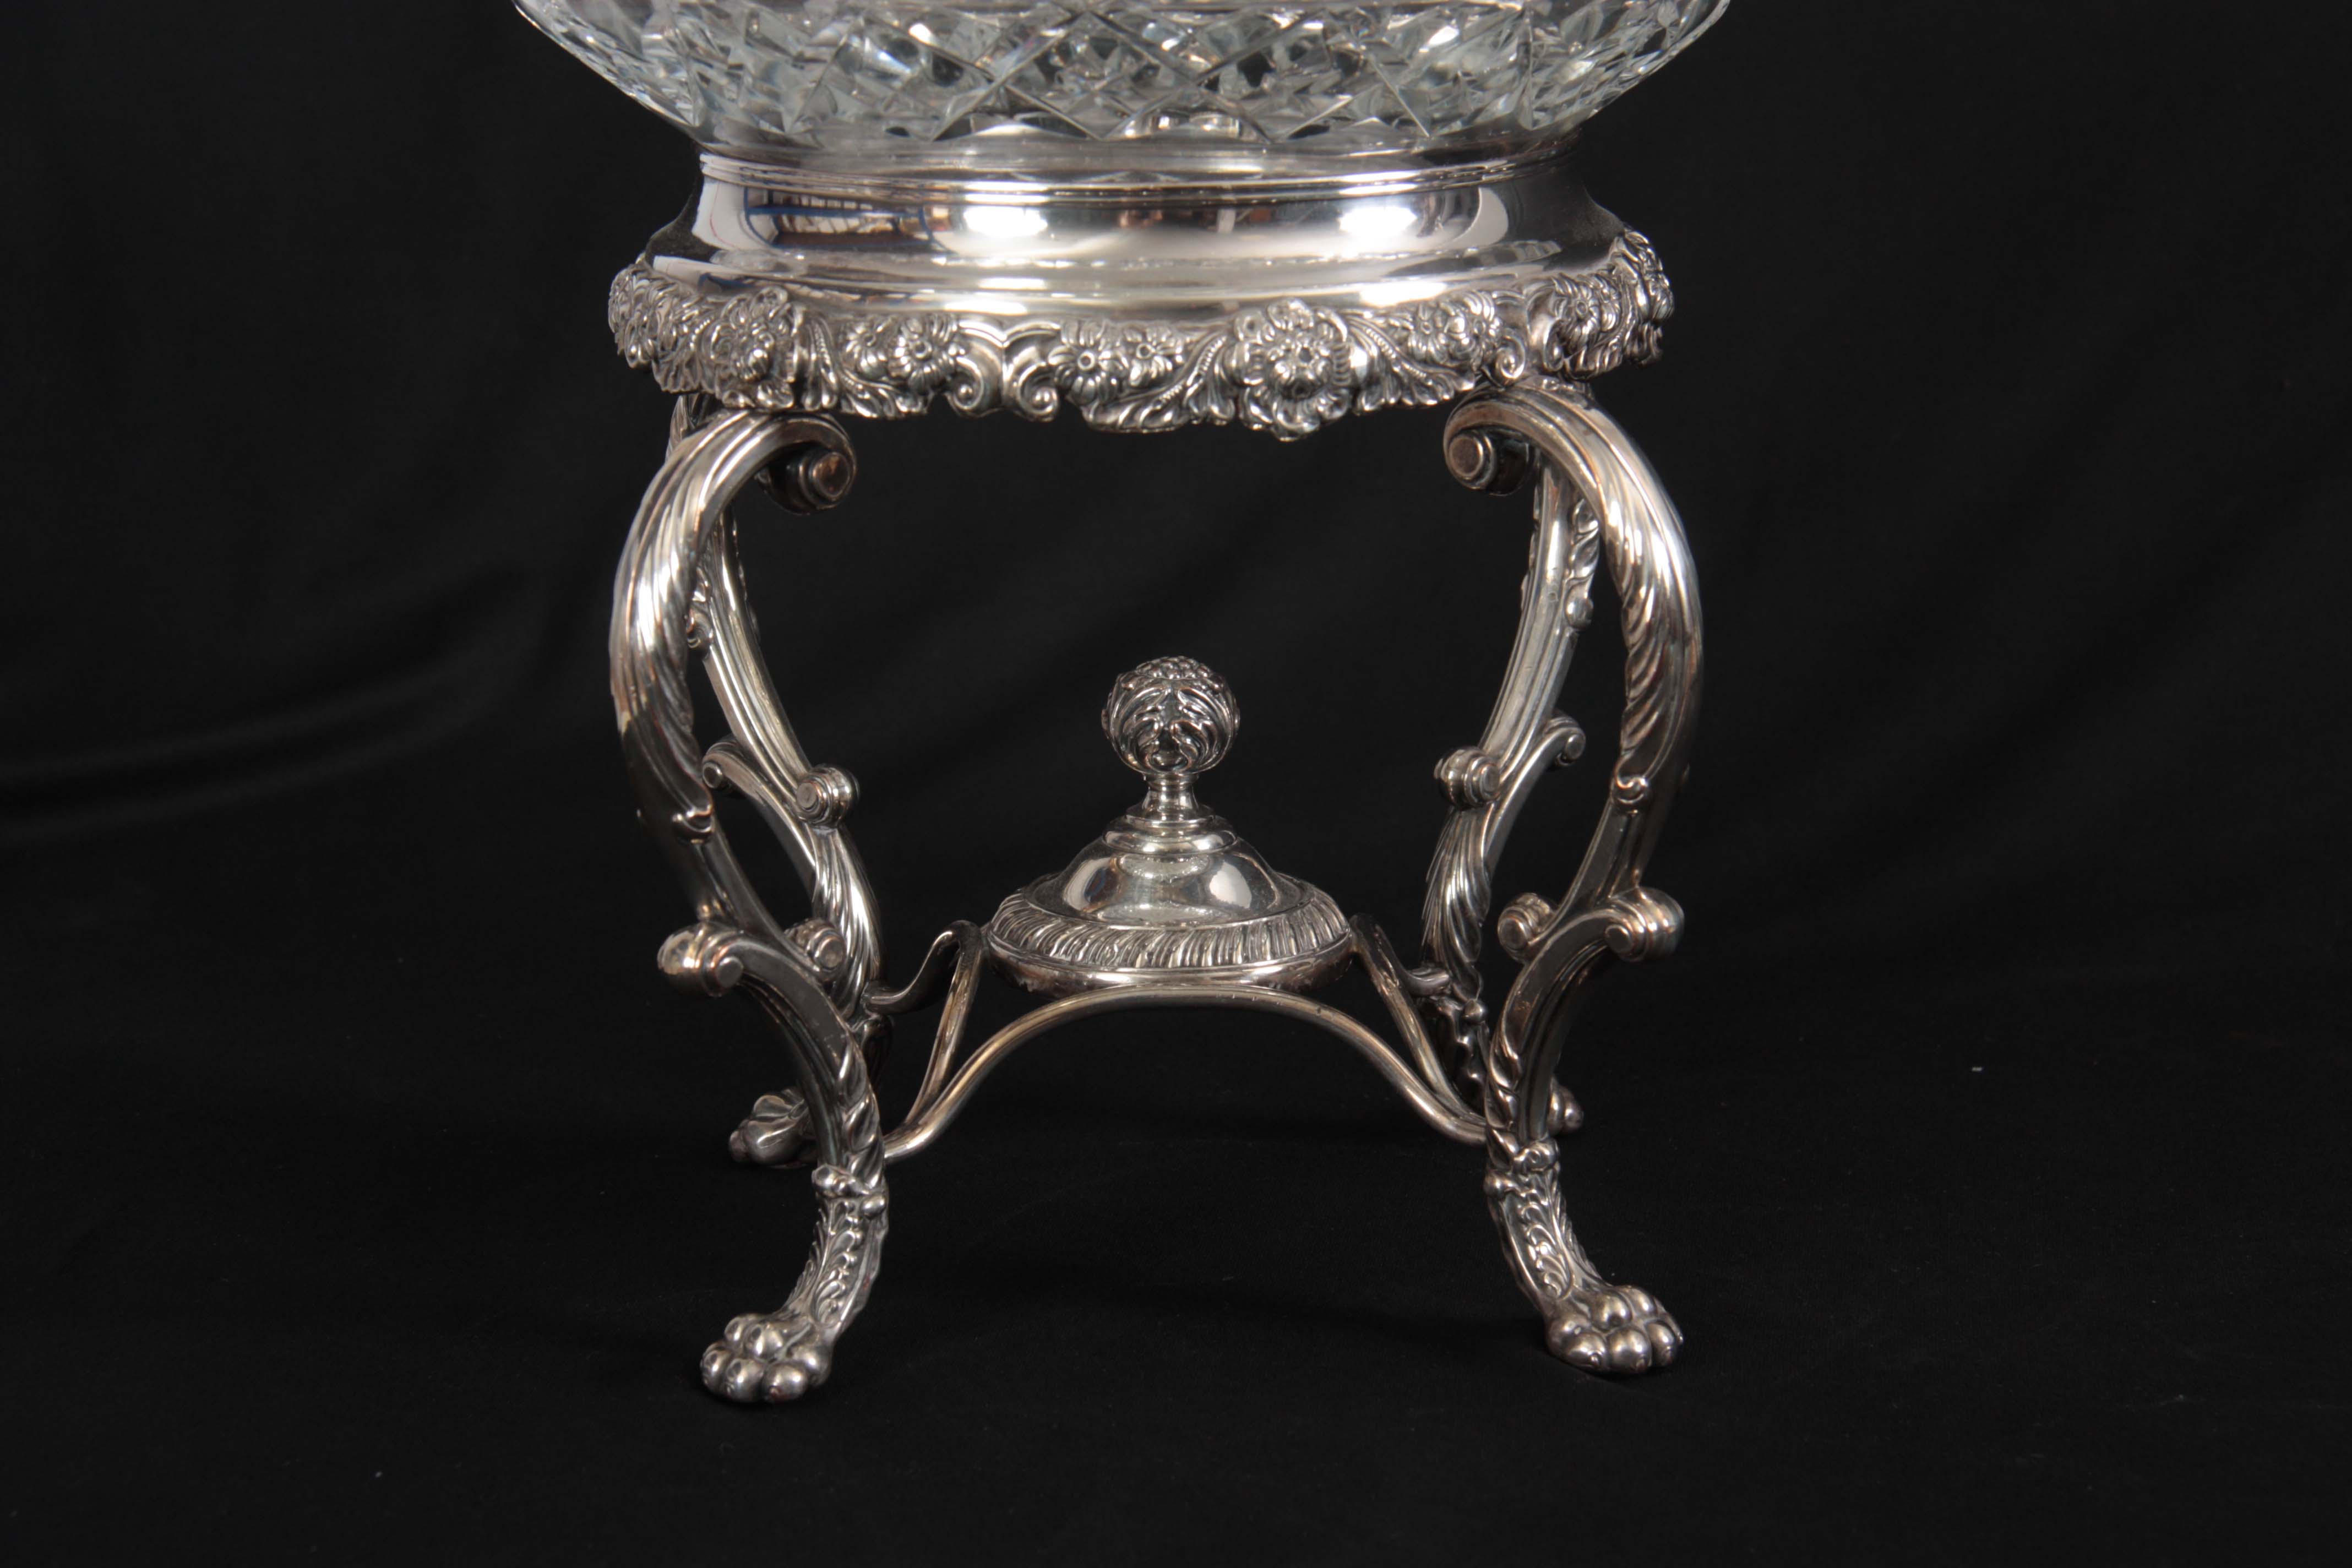 AN ORNATE ROCOCO STYLE 19TH CENTURY SHEFFIELD PLATE CENTREPIECE with later CUT GLASS FRUIT BOWL, the - Image 4 of 6